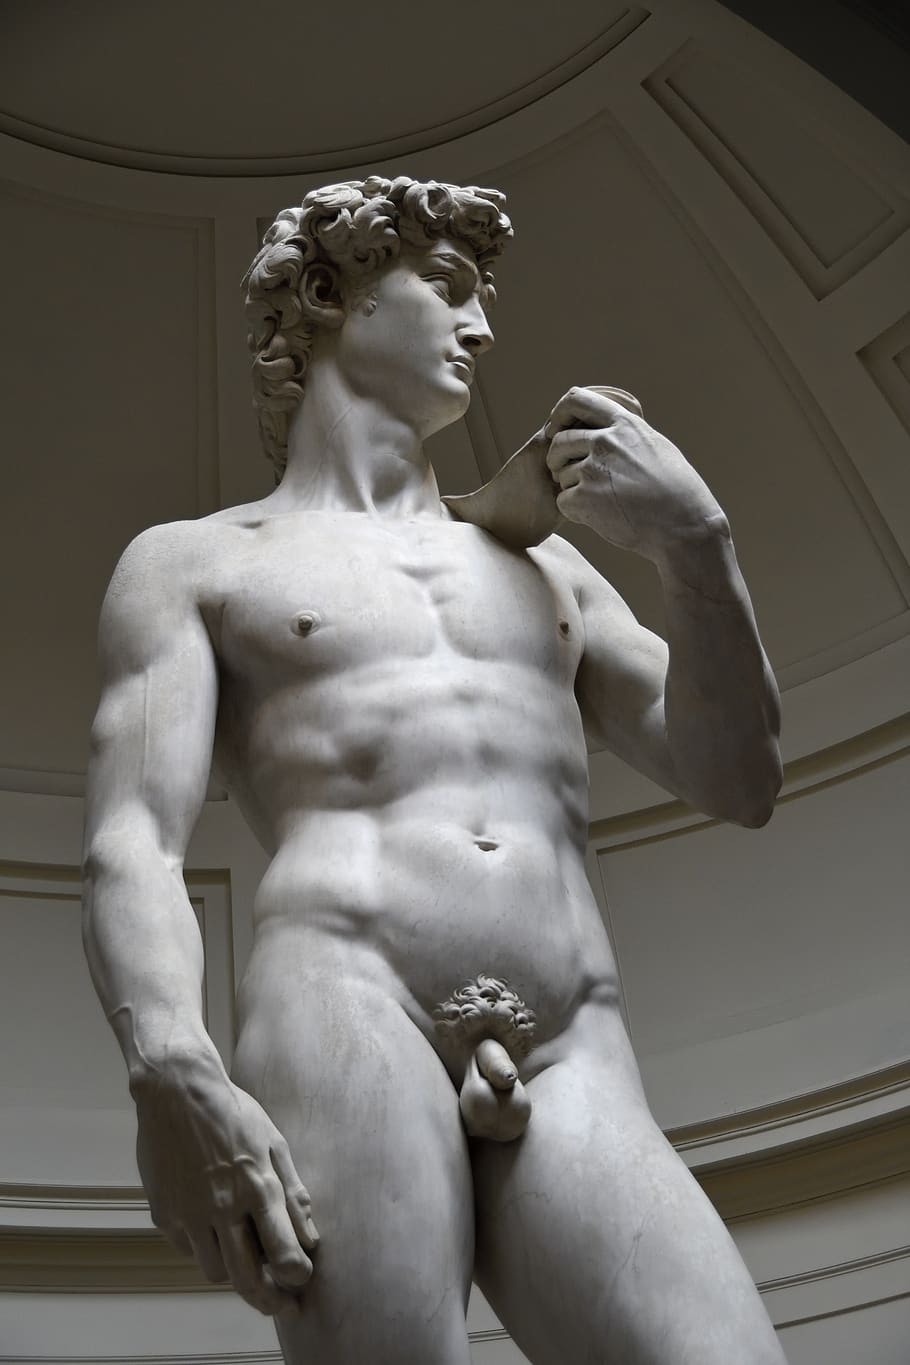 david, miguel angel, statue, florence, revival, sculpture, art, academy, human representation, low angle view